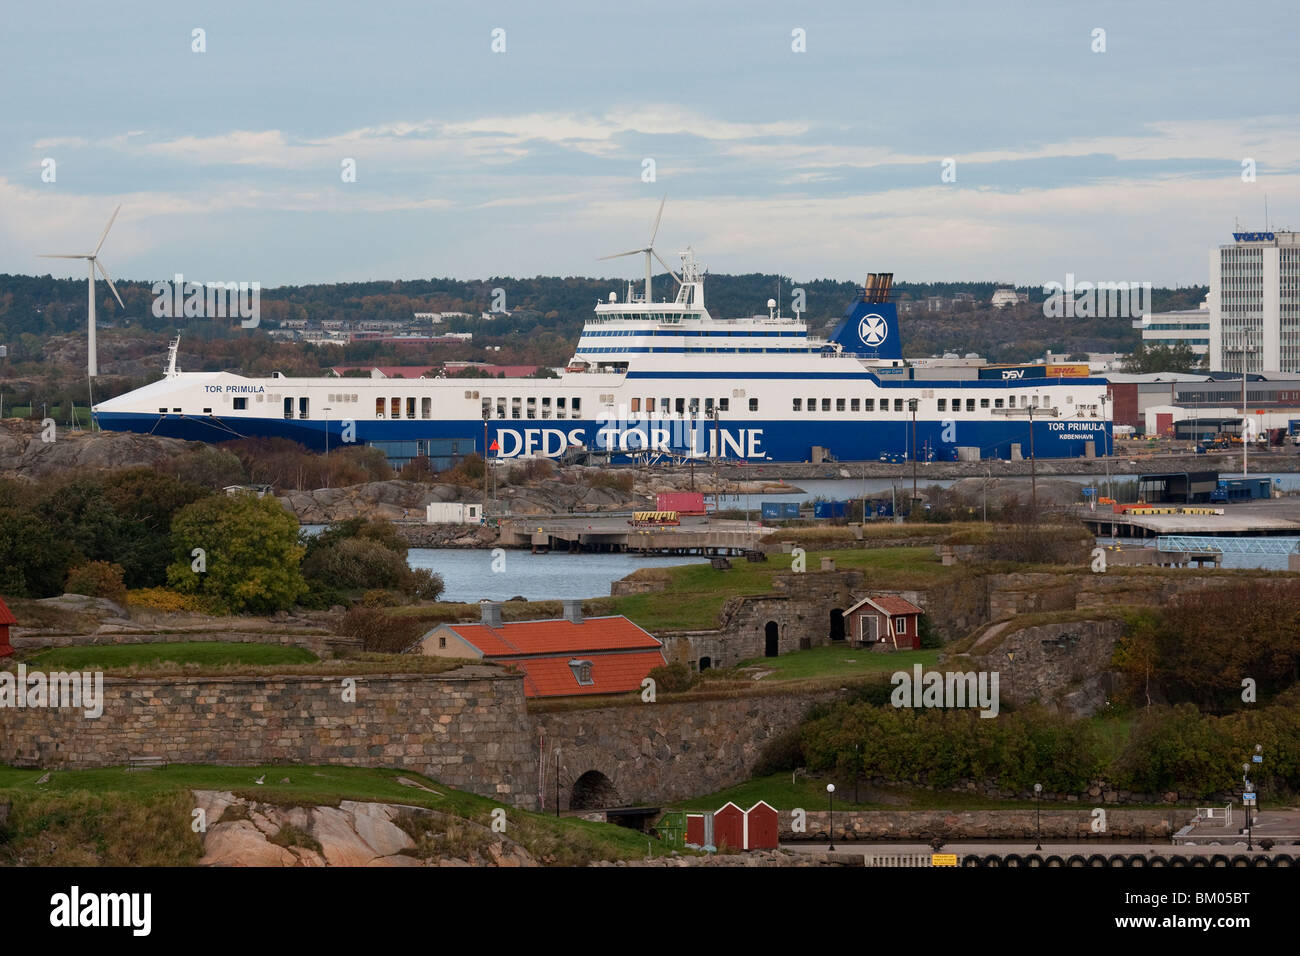 A DFDS Tor Line ro/ro-vessel at the Skania Hamnen, Gothenburg. Stock Photo